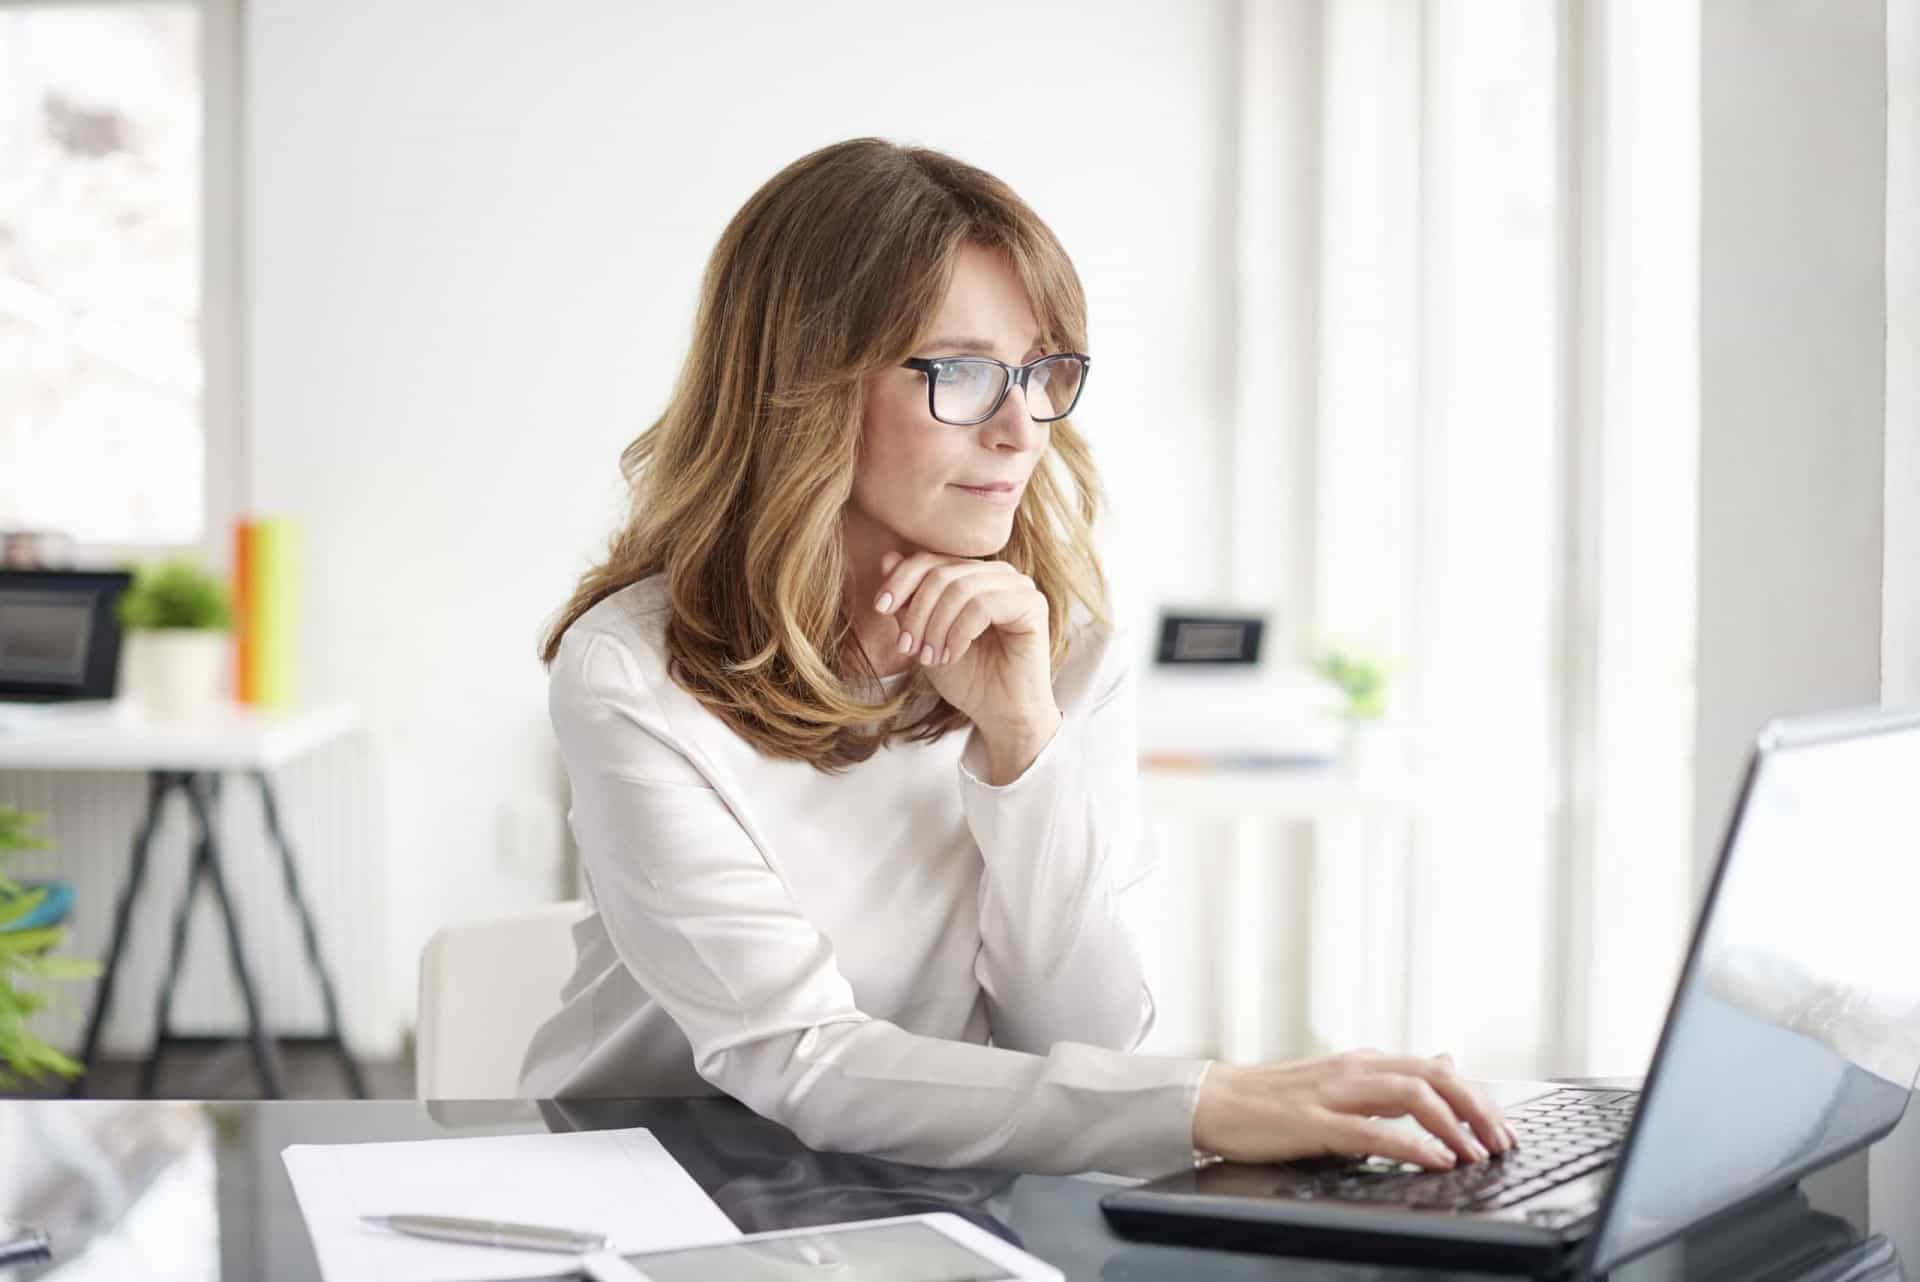 <p>While you might imagine working from your bed in your pajamas with music playing and food cooking can only be easy, working remotely has a whole other roster of obstacles set apart from commuting to work, <a href="https://www.starsinsider.com/lifestyle/367037/are-you-guilty-of-these-annoying-office-habits%20" rel="noopener">time-wasting activities in the office</a>, and having a dress code. It actually requires you to strengthen specific skills and establish certain rules if you want to keep up productivity and properly separate work from personal life.</p><p>As more and more companies are allowing their employees to work remotely, click through this gallery to learn how to best make use of the opportunity, and you’ll find that these skills are highly transferable!</p><p>You may also like:<a href="https://www.starsinsider.com/n/328414?utm_source=msn.com&utm_medium=display&utm_campaign=referral_description&utm_content=426738v3en-en"> Actors and actresses who refuse to get naked on-screen</a></p>